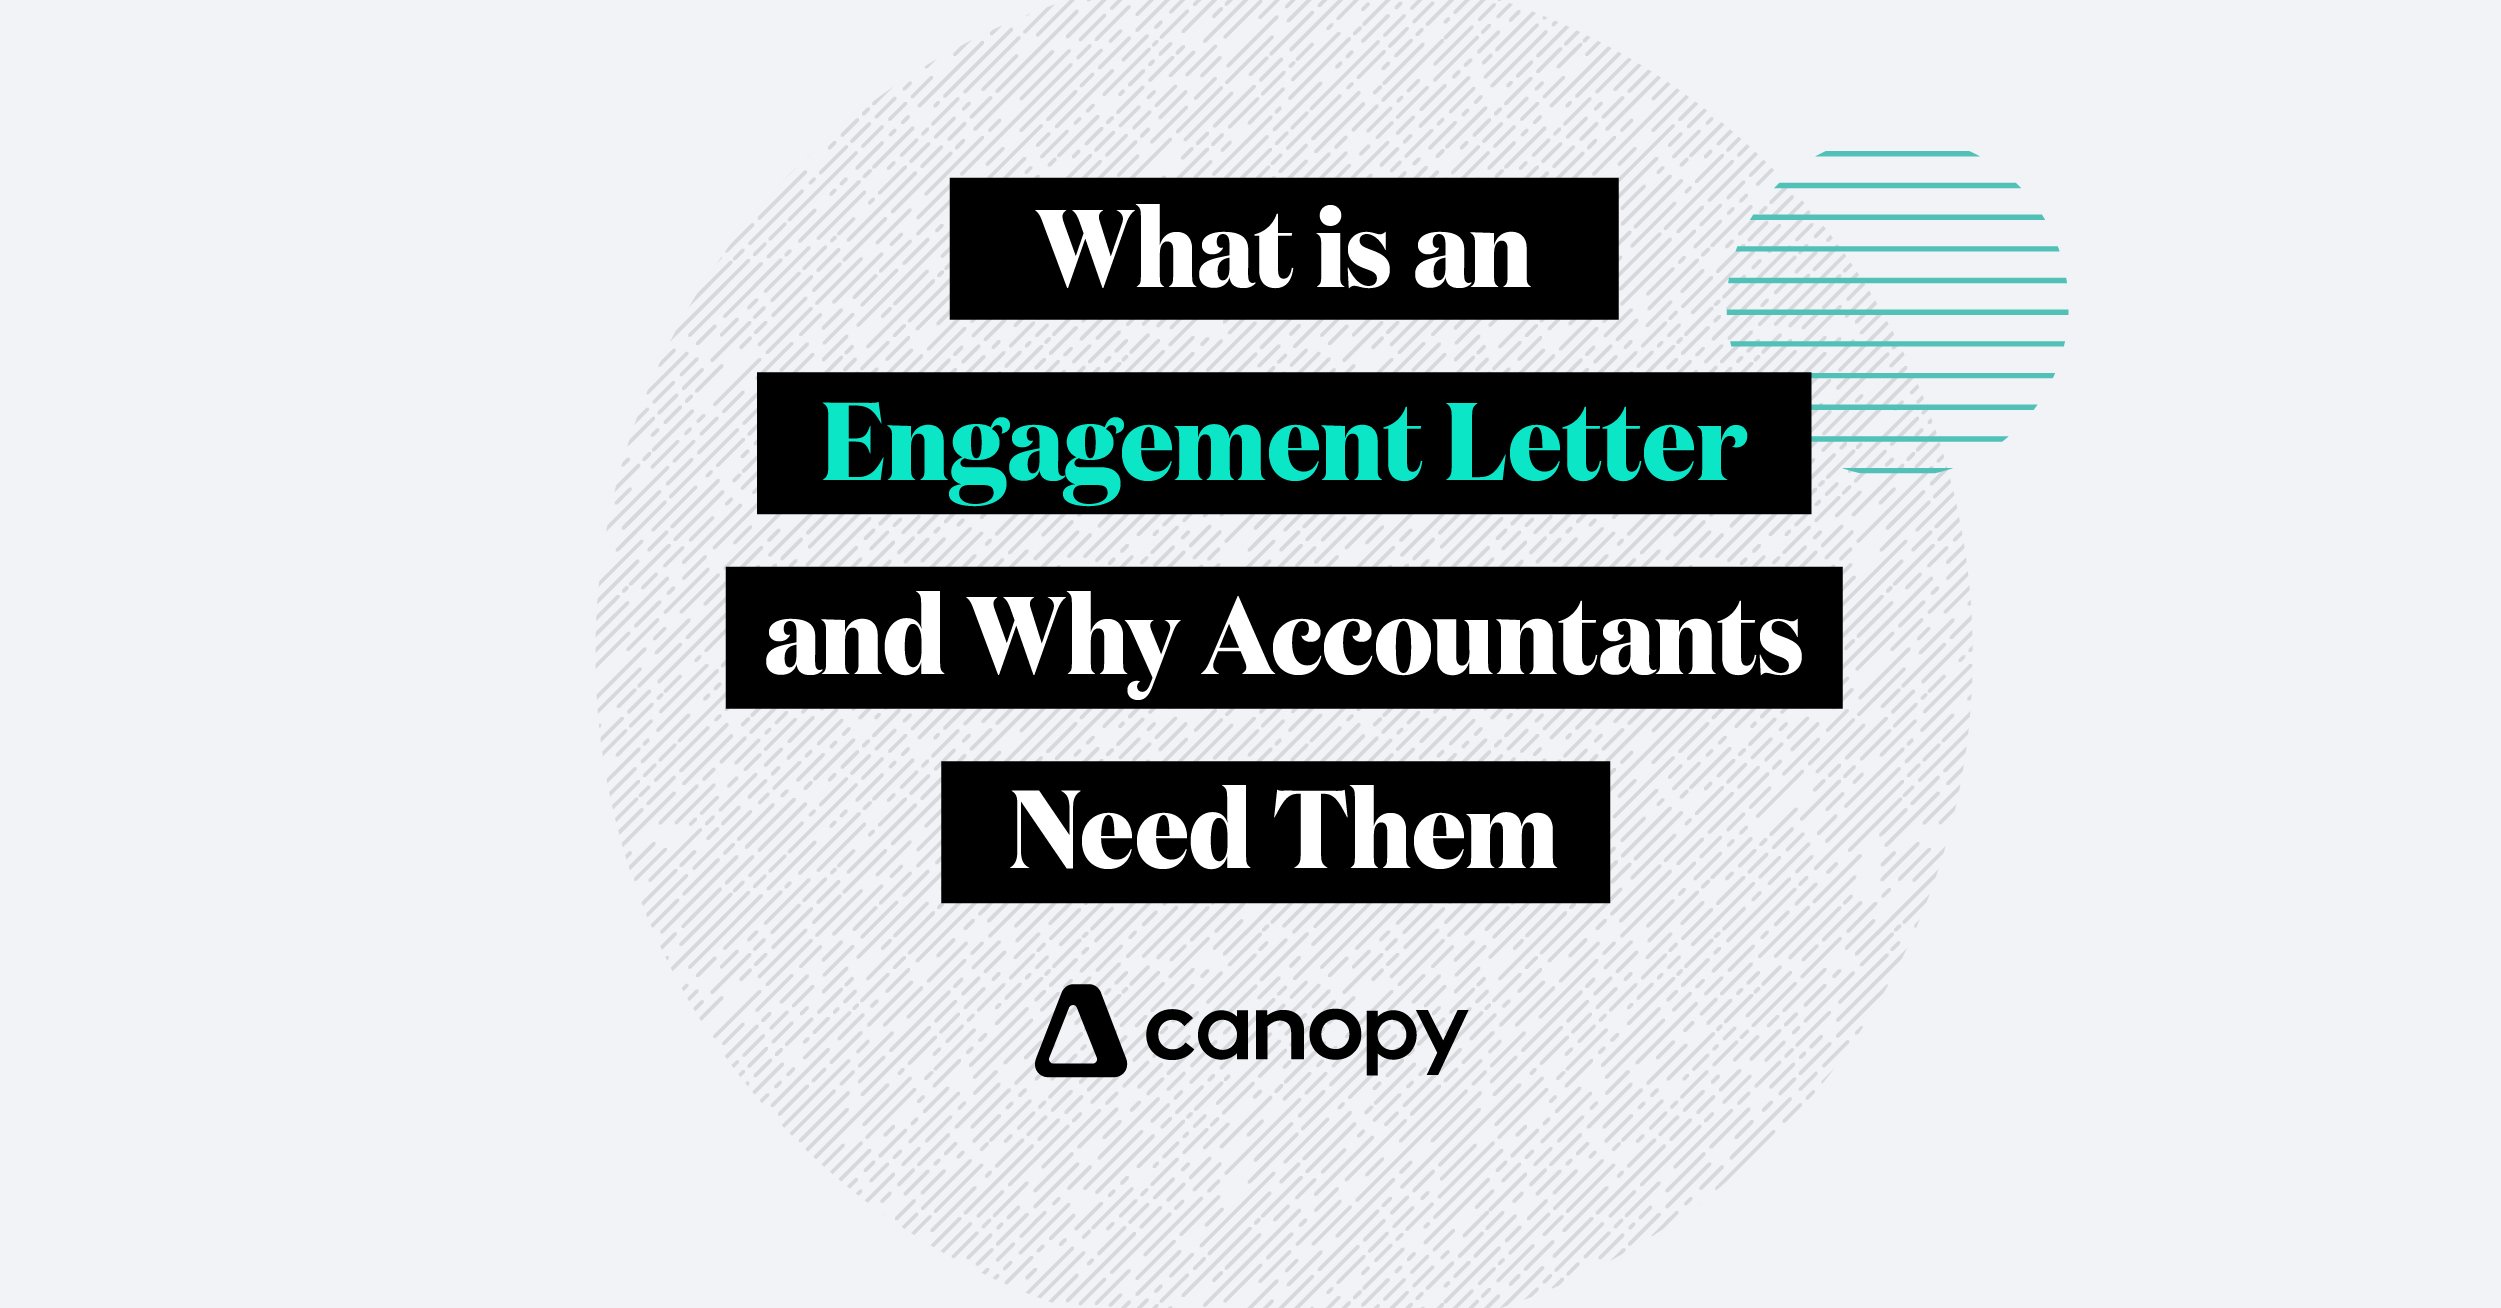 What is an Engagement Letter and Why Accountants Need Them